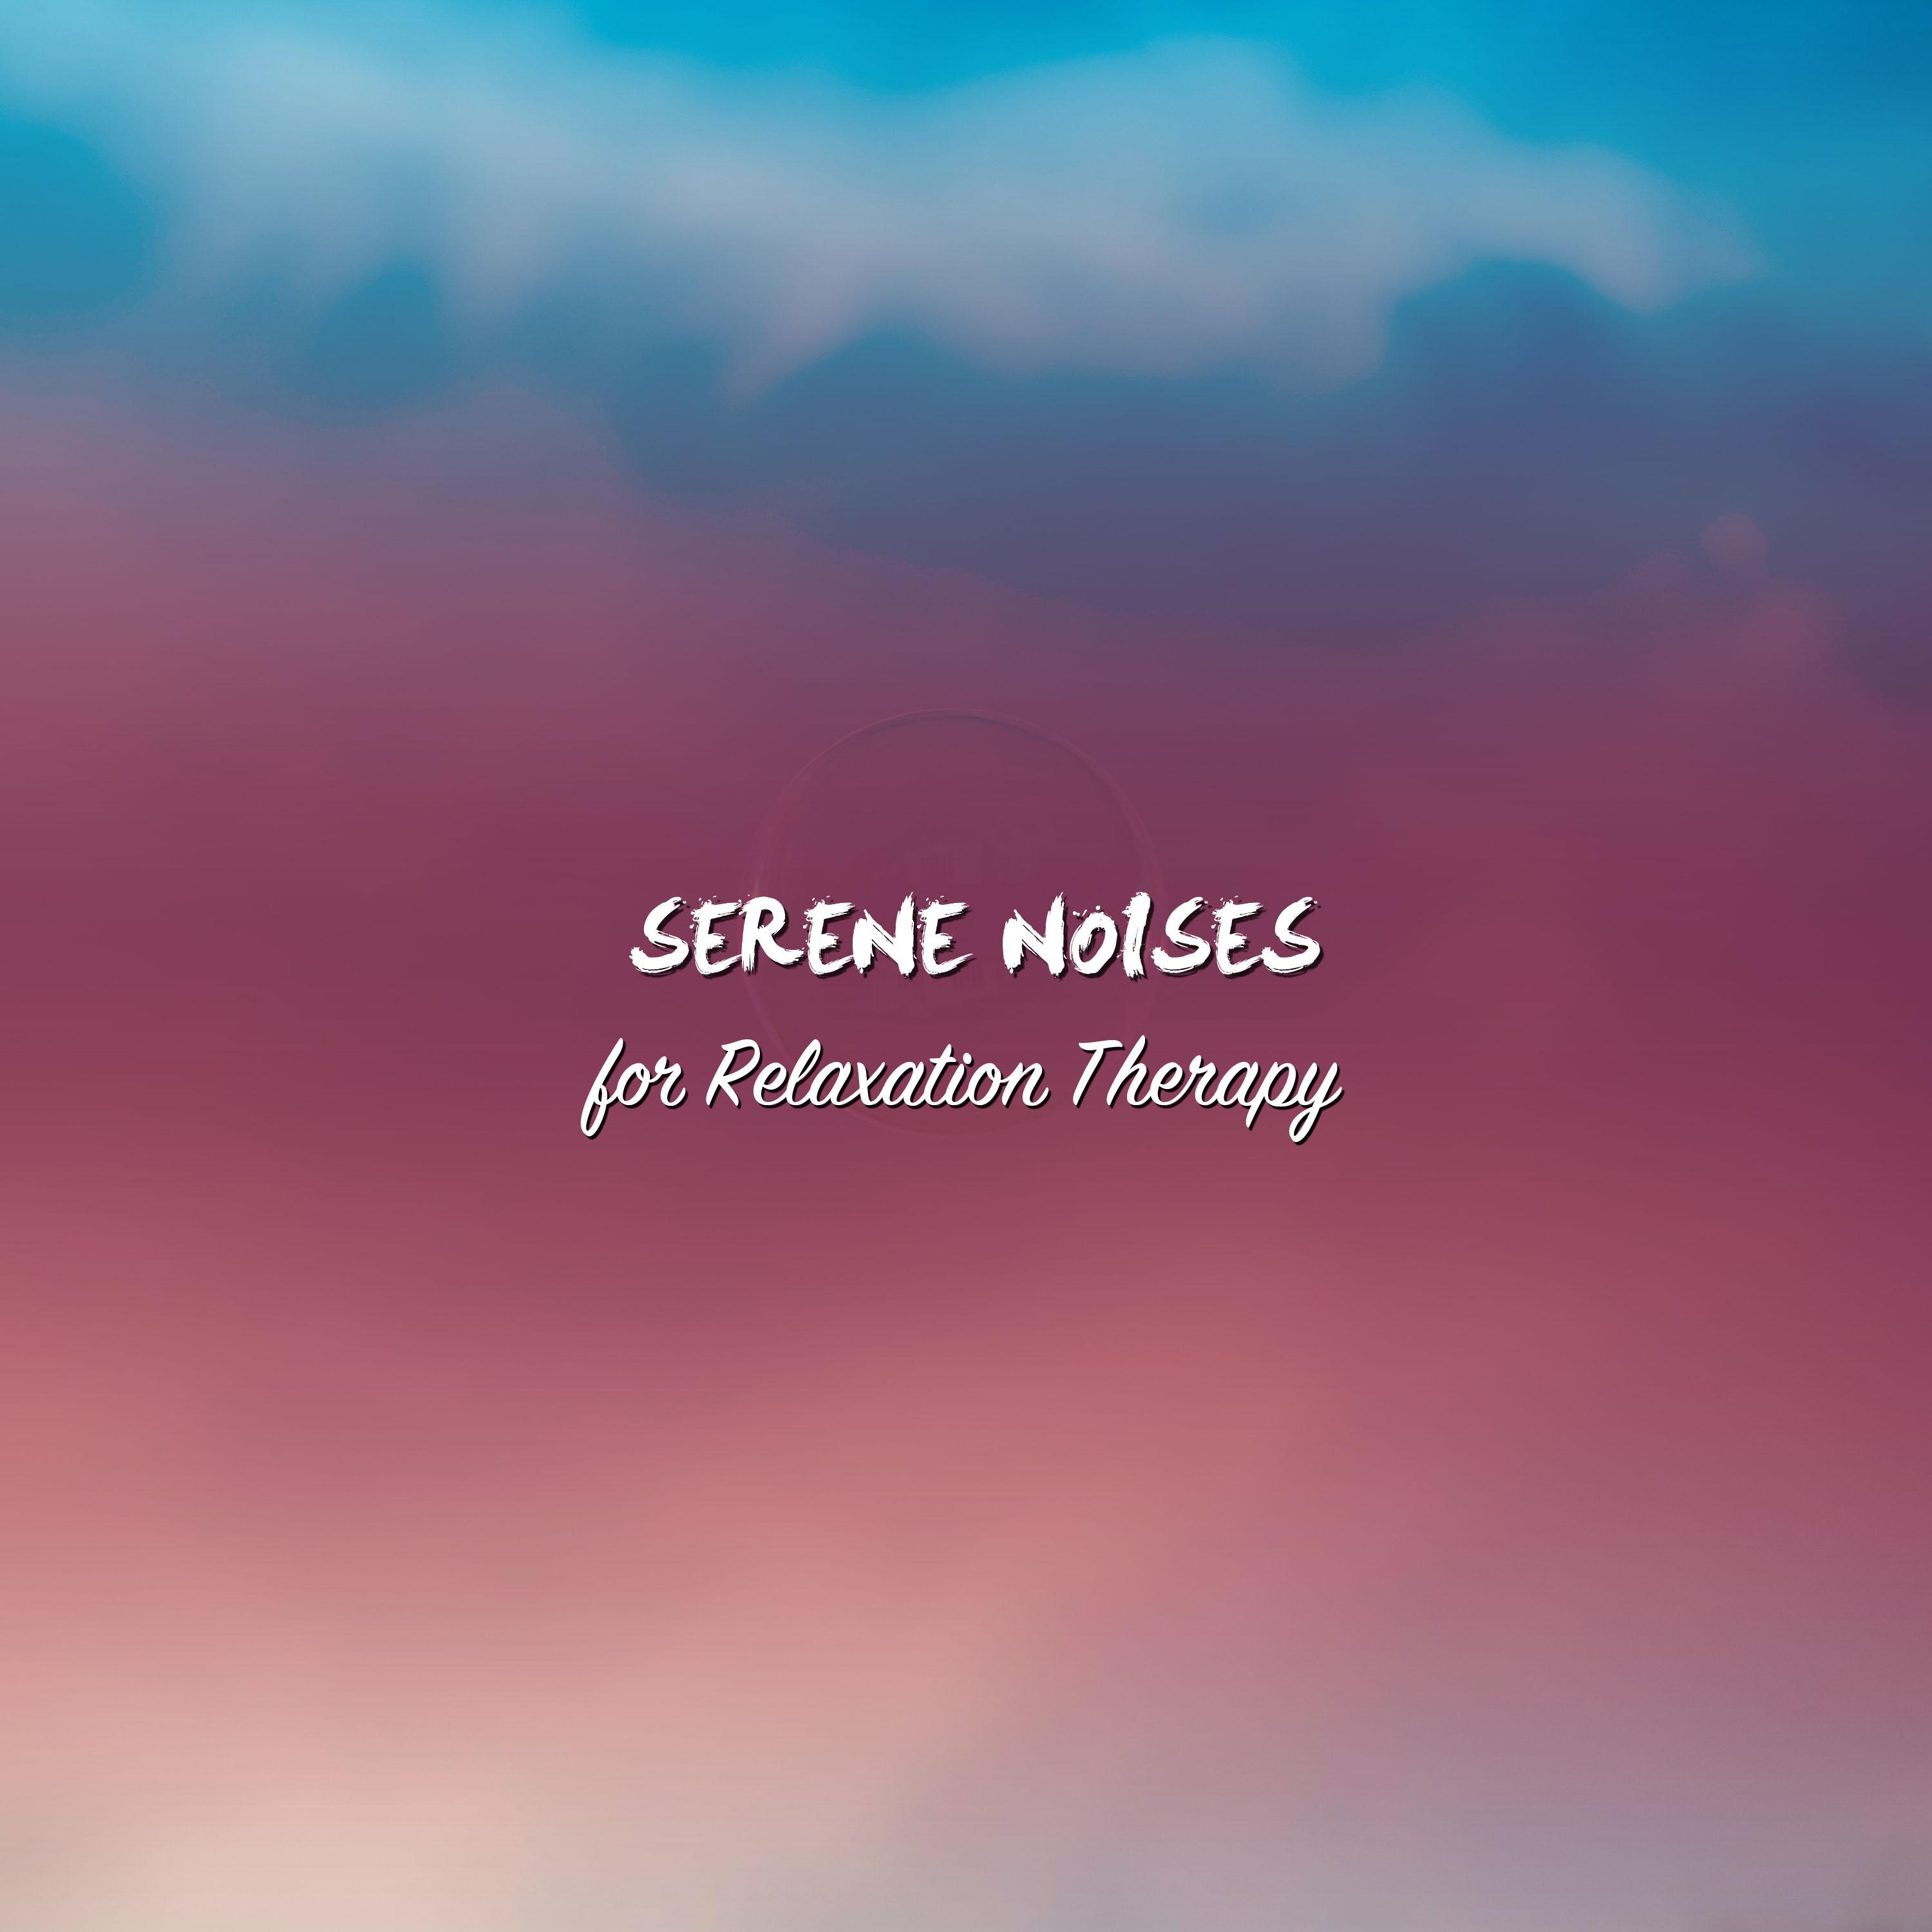 22 Serene Noises for Relaxation Therapy